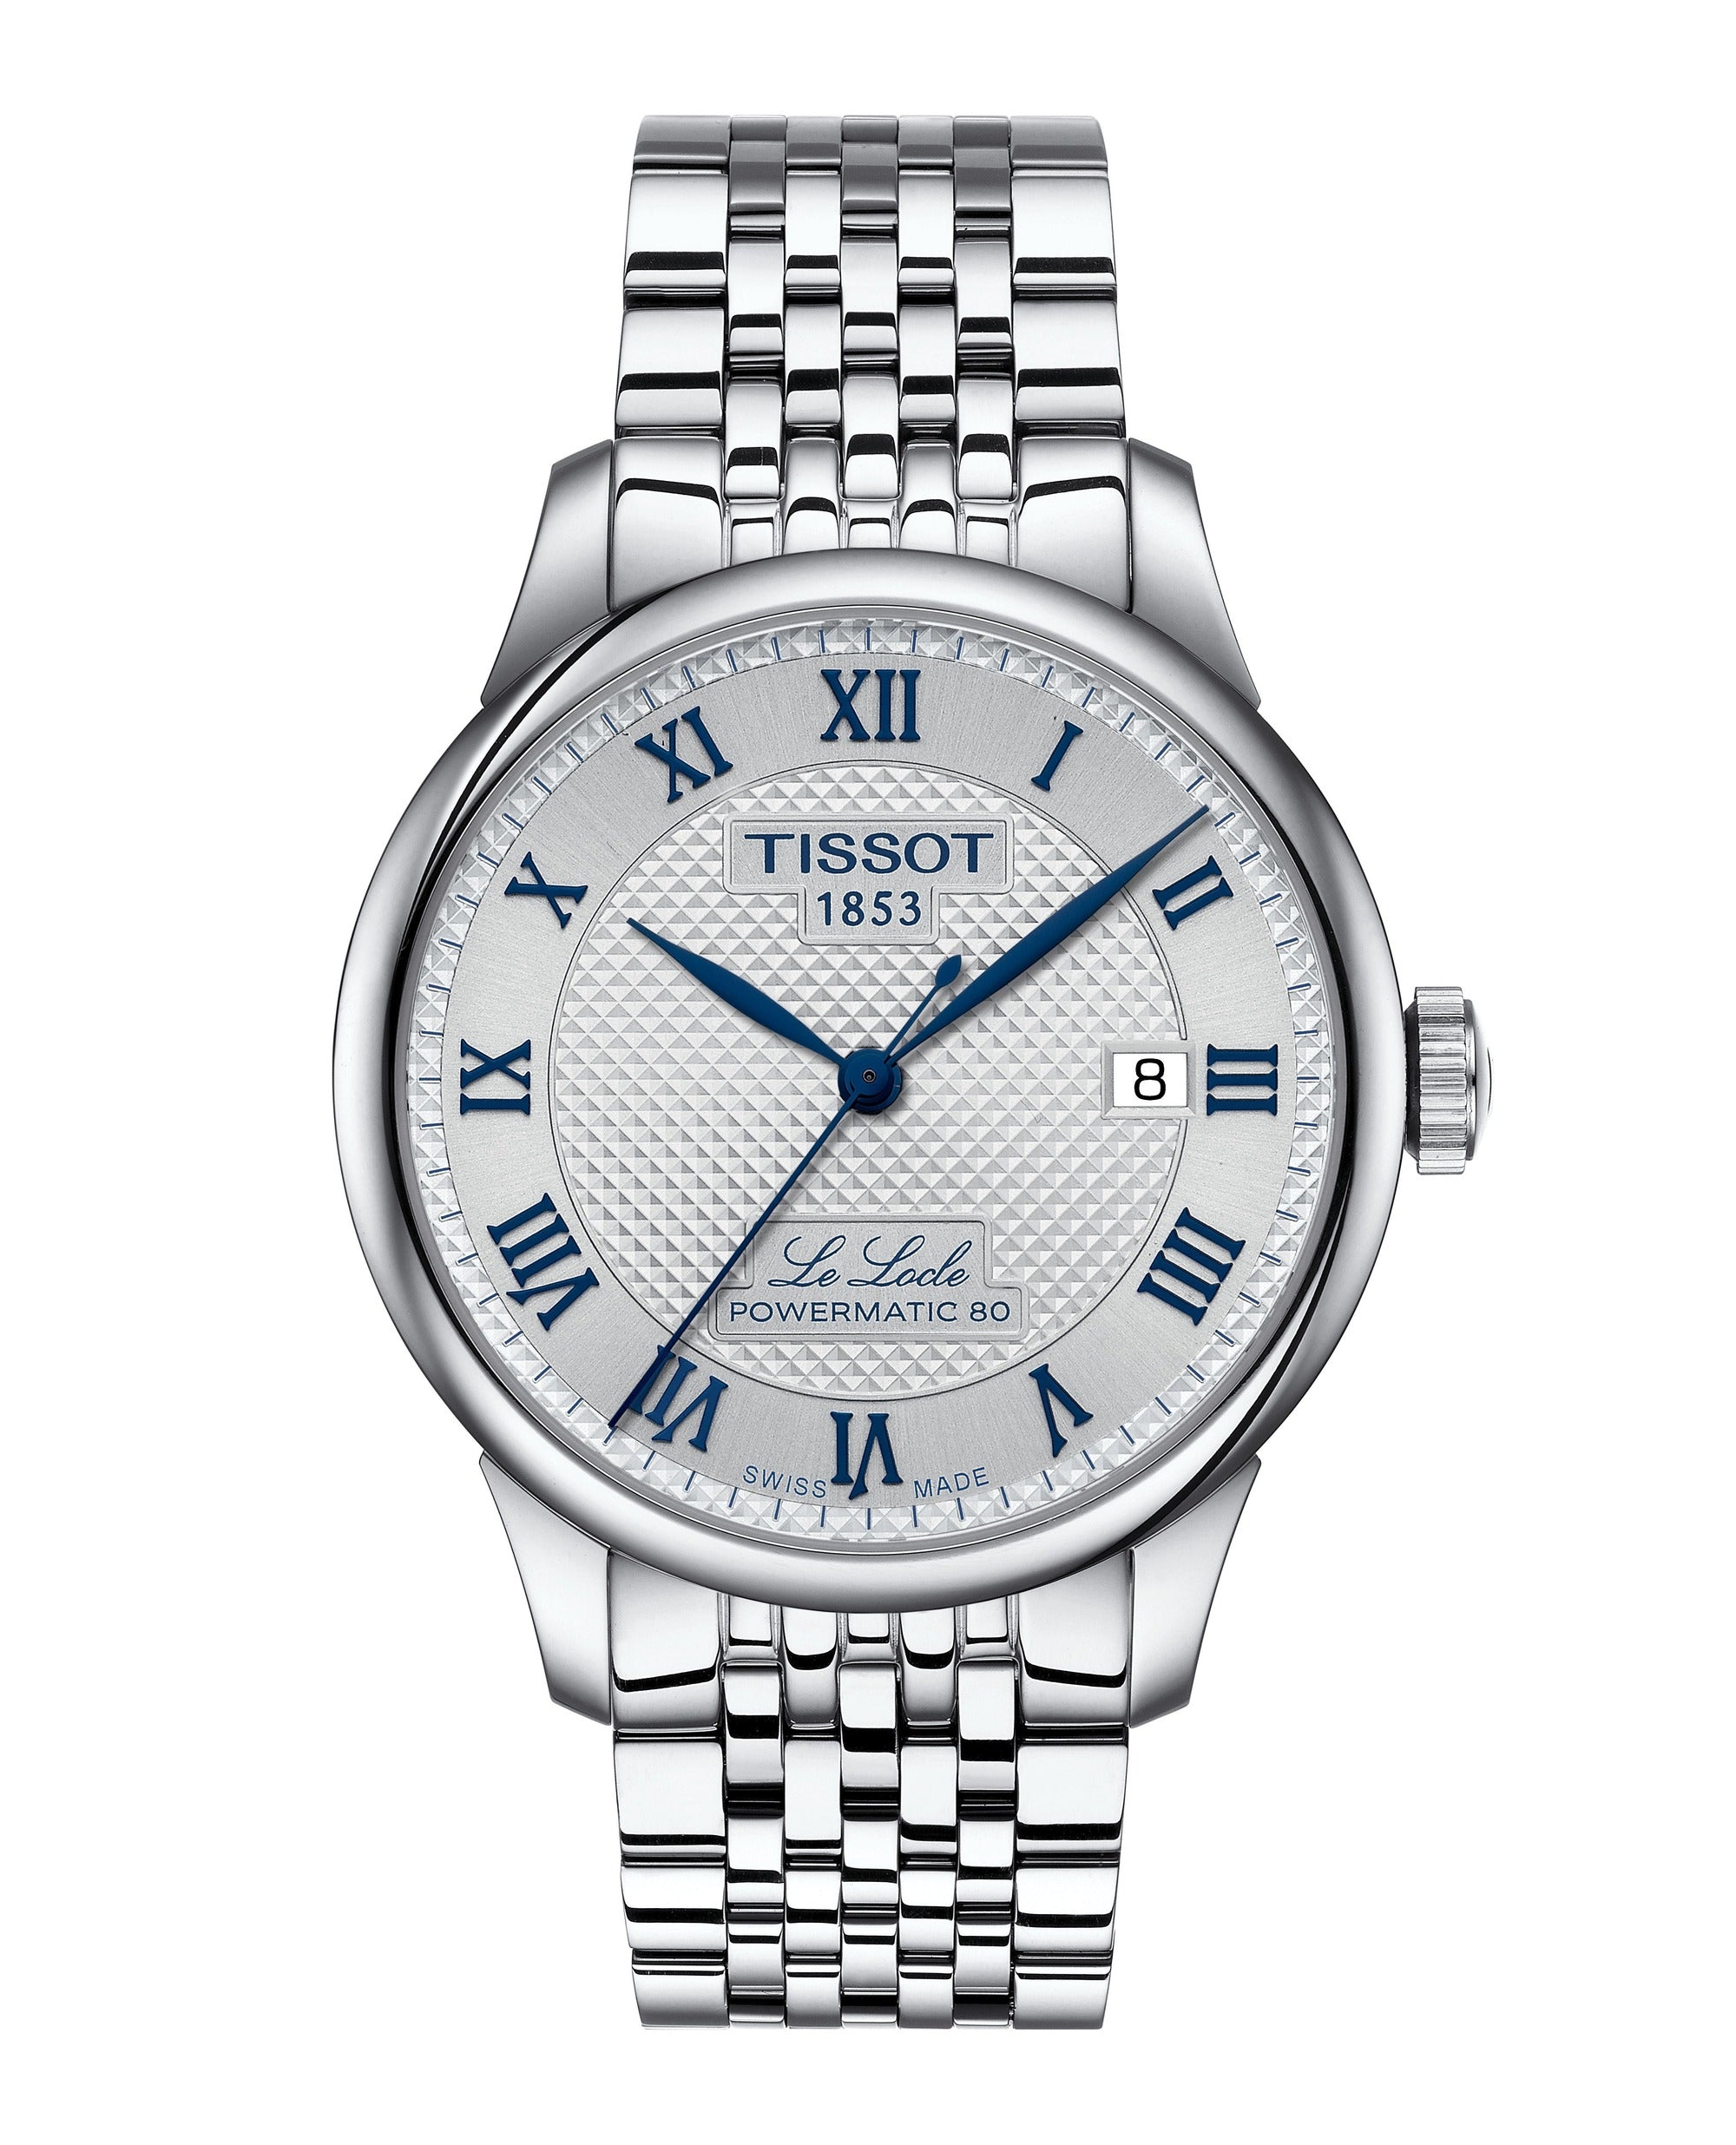 Tissot Le Locle Powermatic 80 20th Anniversary Automatic Men's Watch T0064071103303